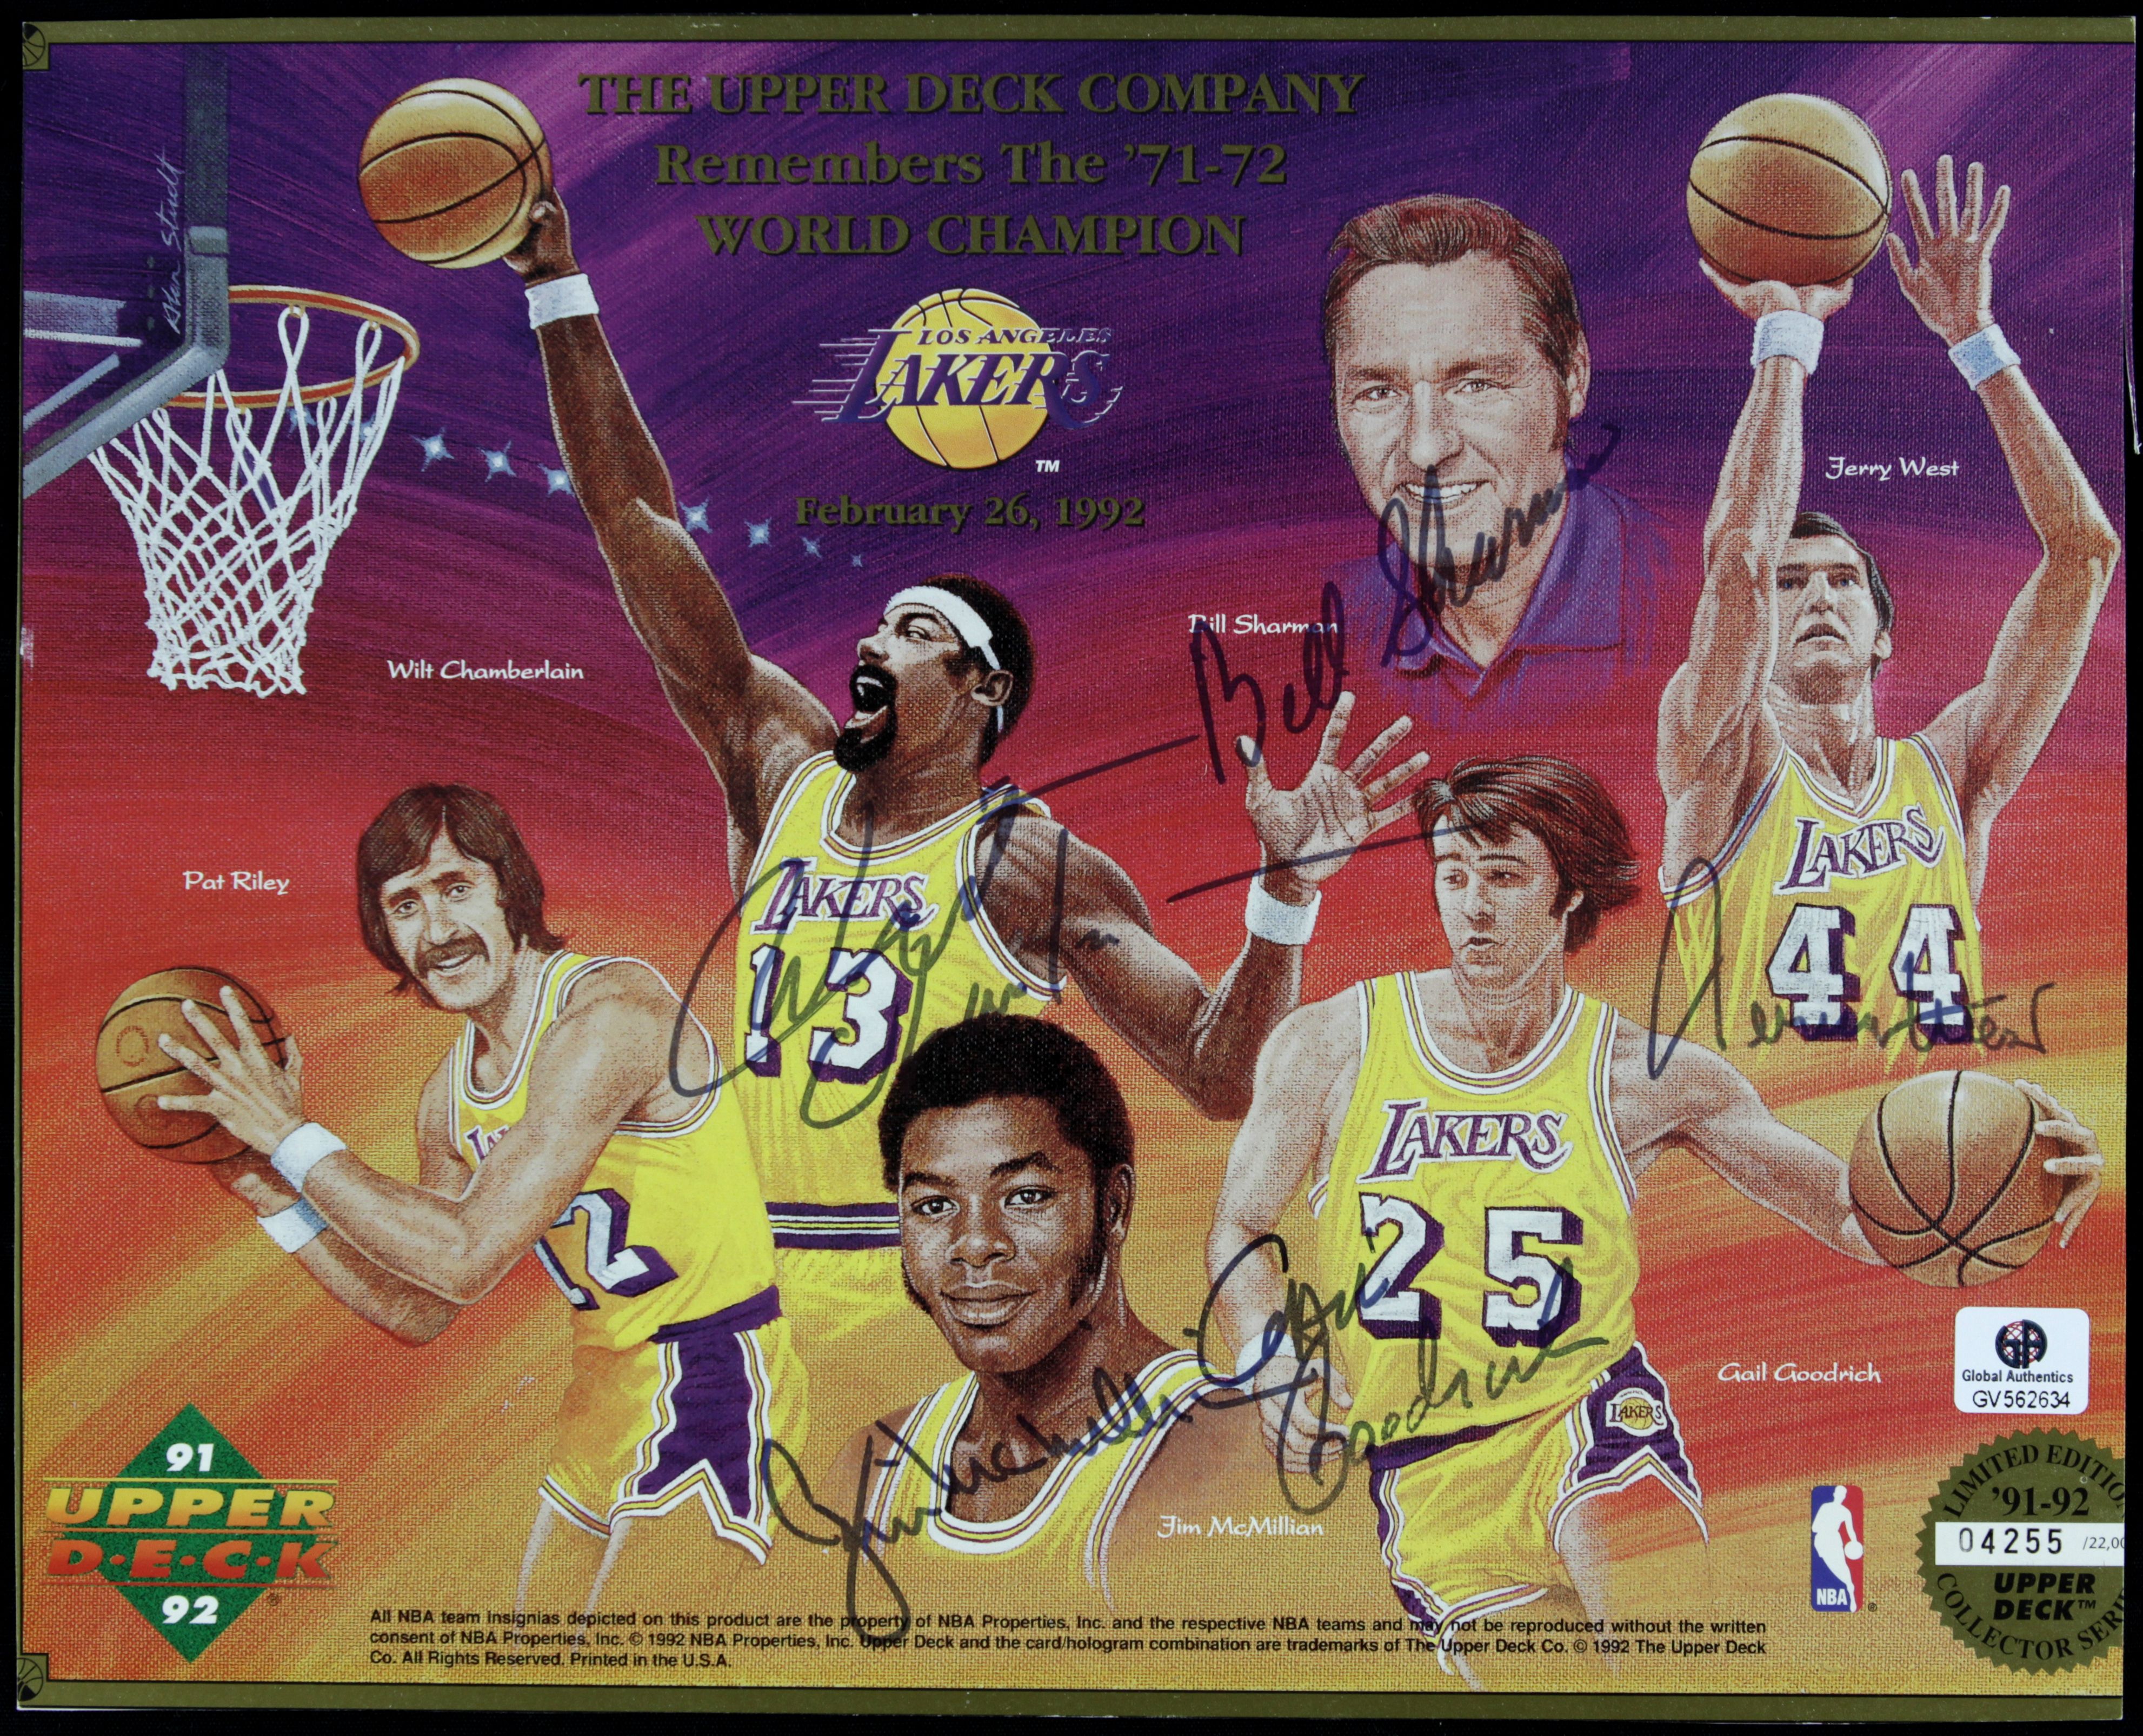 Gail Goodrich Archives - Lakers Nation